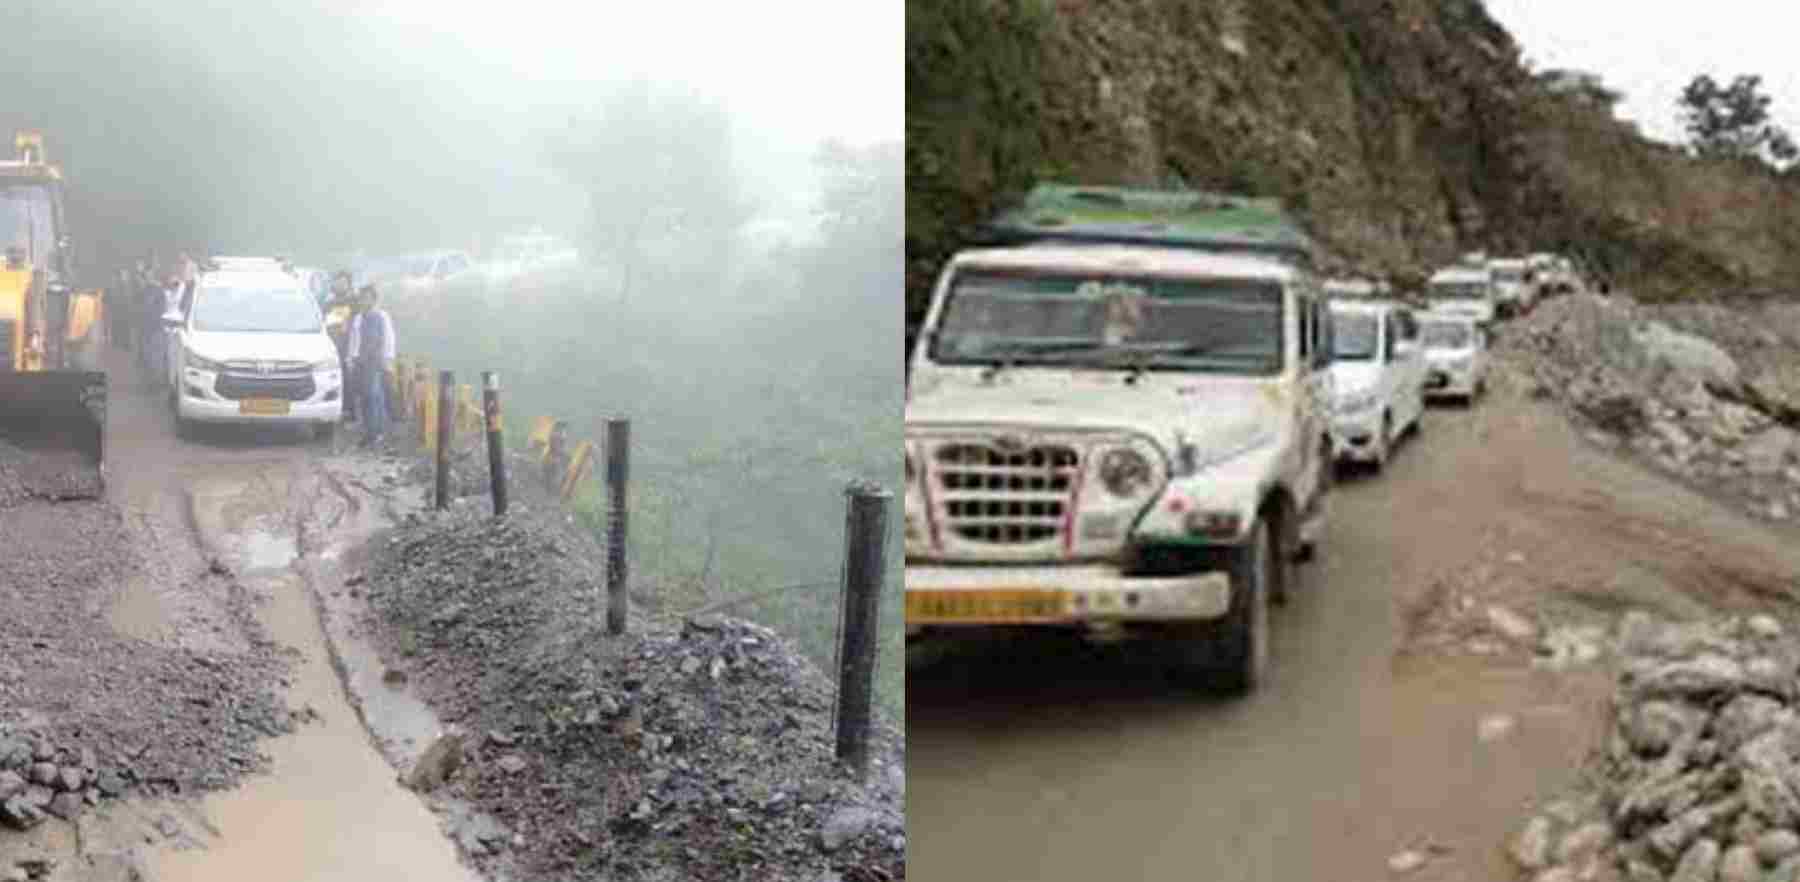 Uttarakhand news: Pauri Devprayag motor road will remain closed from July 25, orders issued.